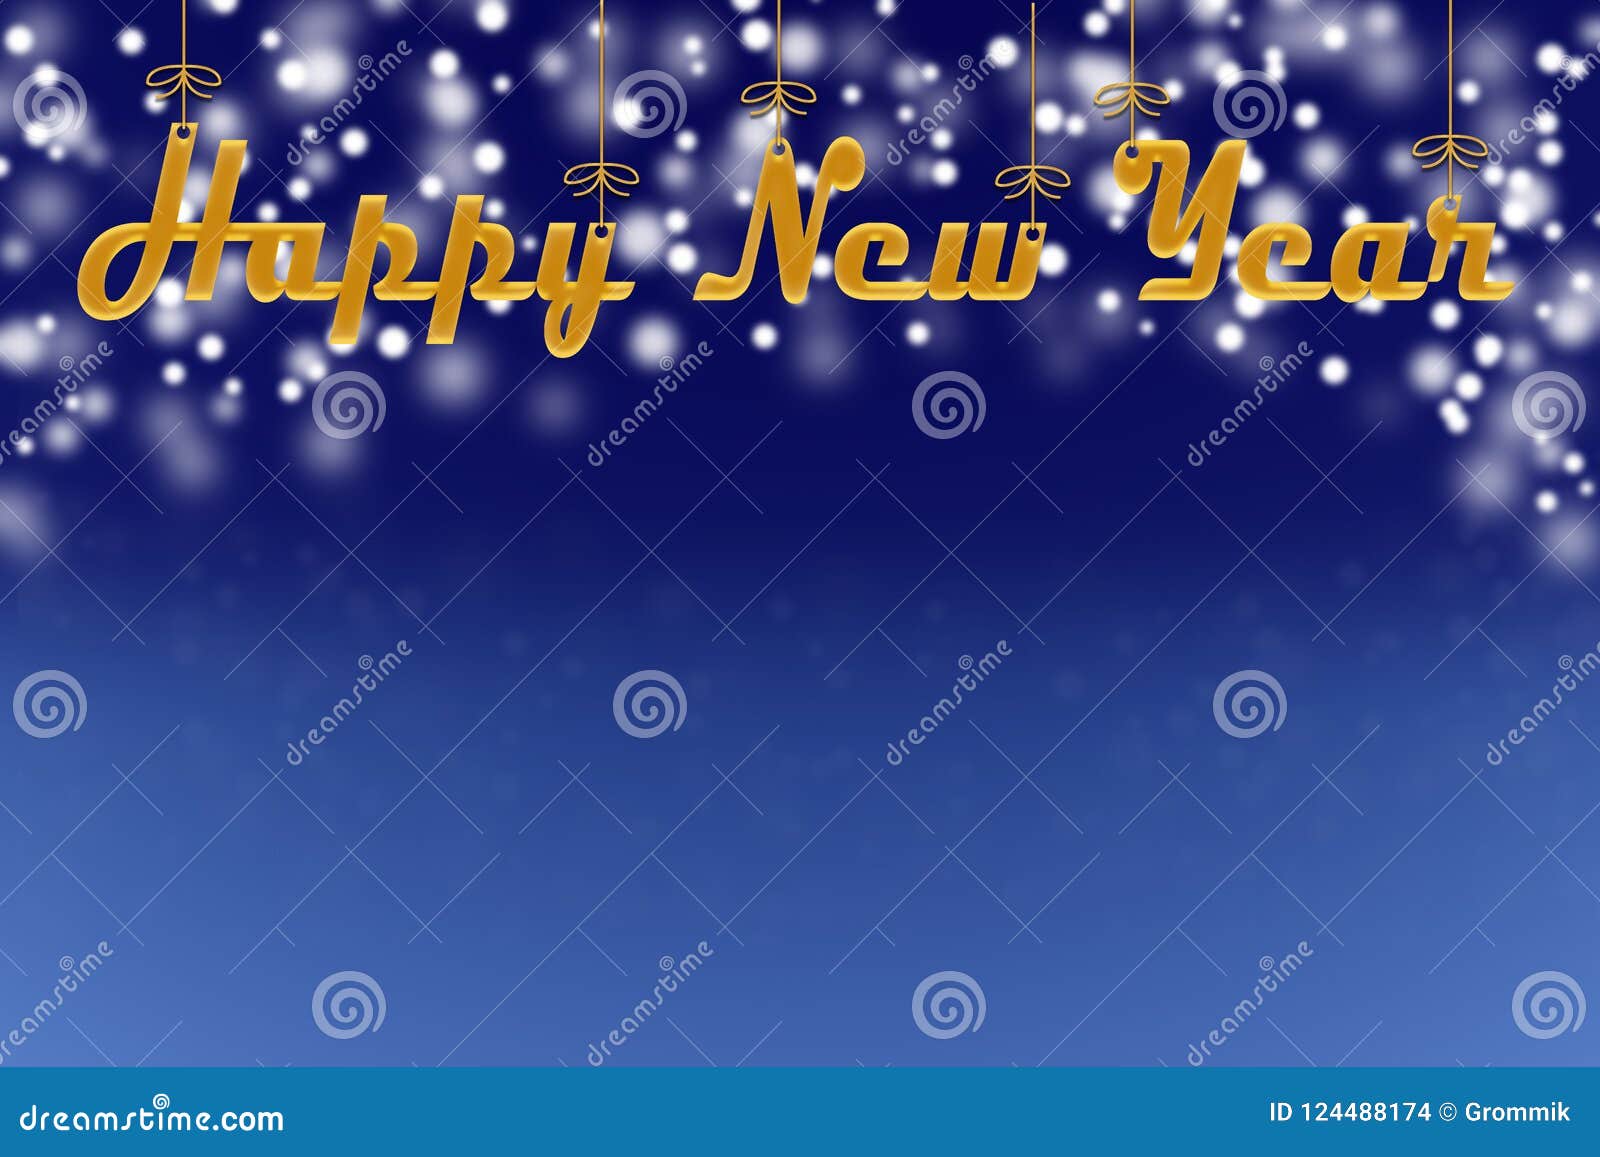 Christmas Background, Screensaver for Christmas and New Year Greetings ...